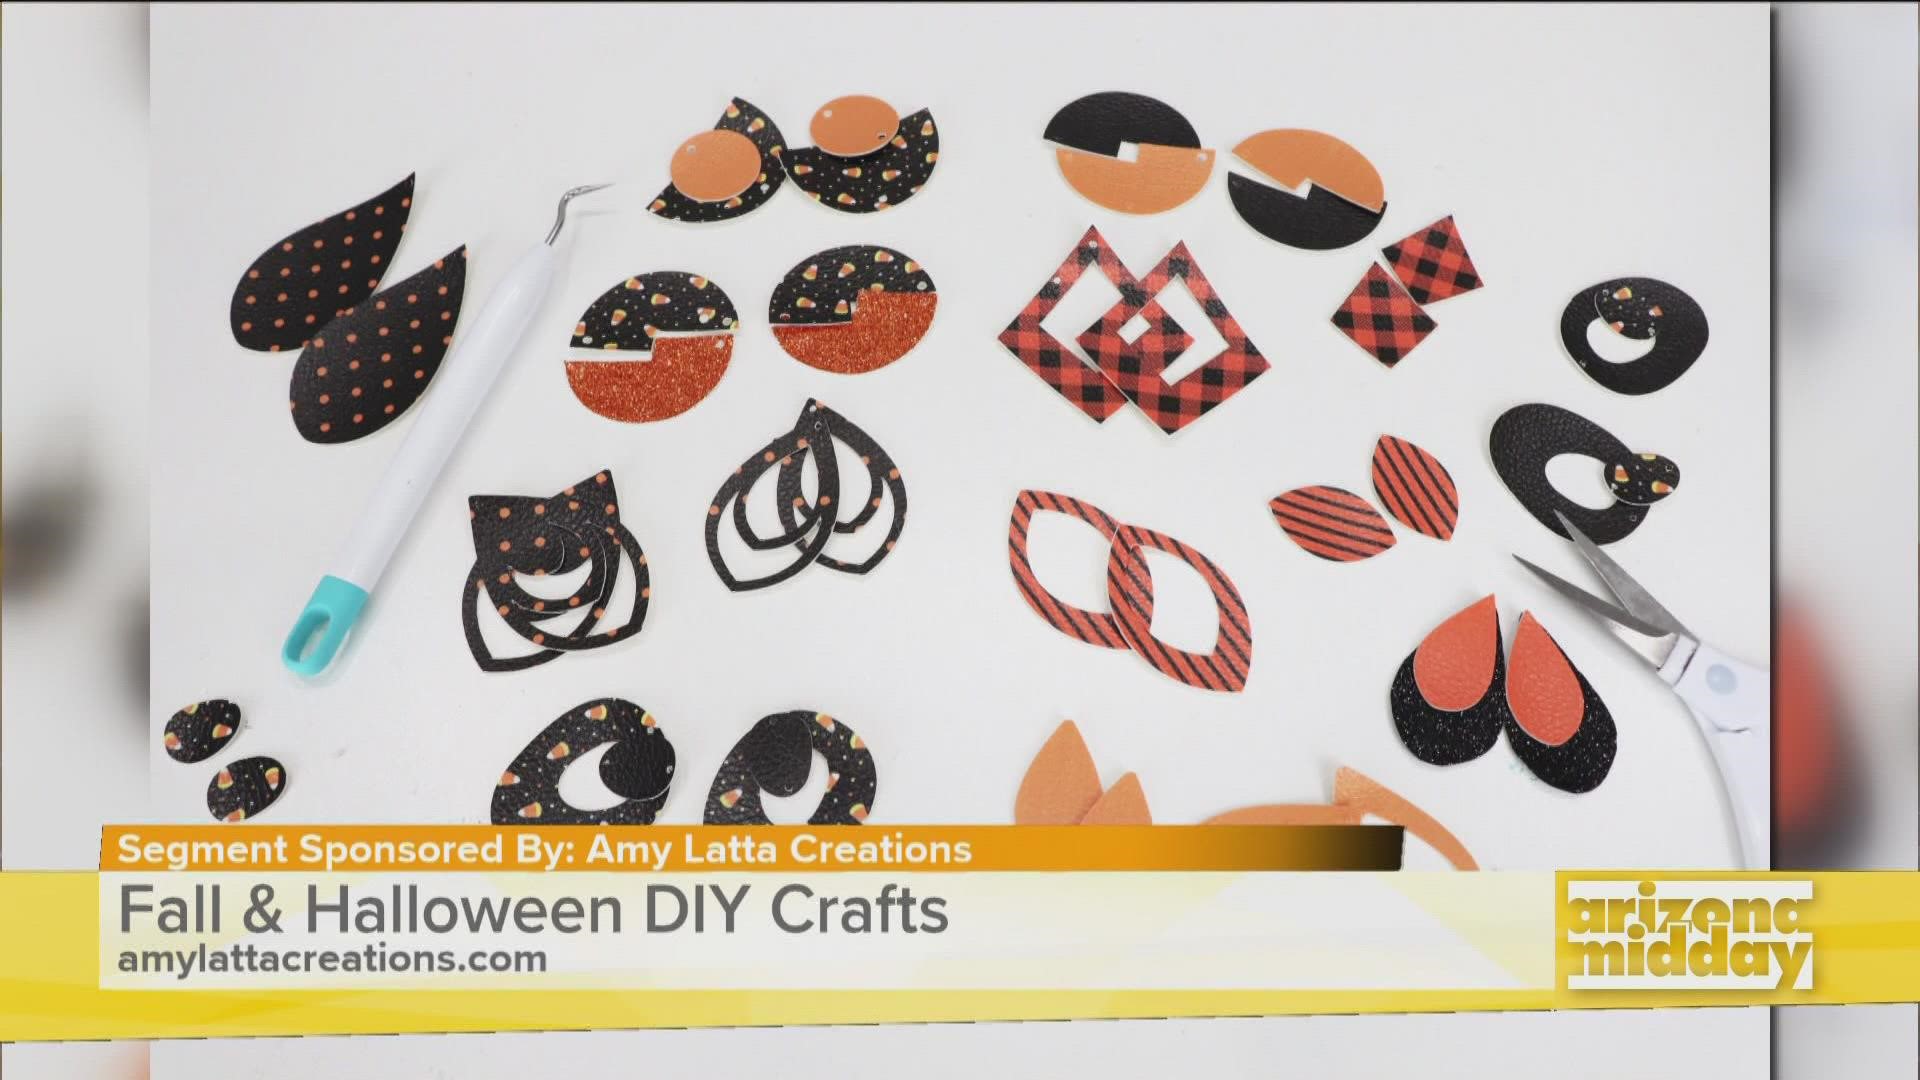 Crafter Amy from Amy Latta Creations shows us how to make fun crafts like art, earrings and clings for Halloween.